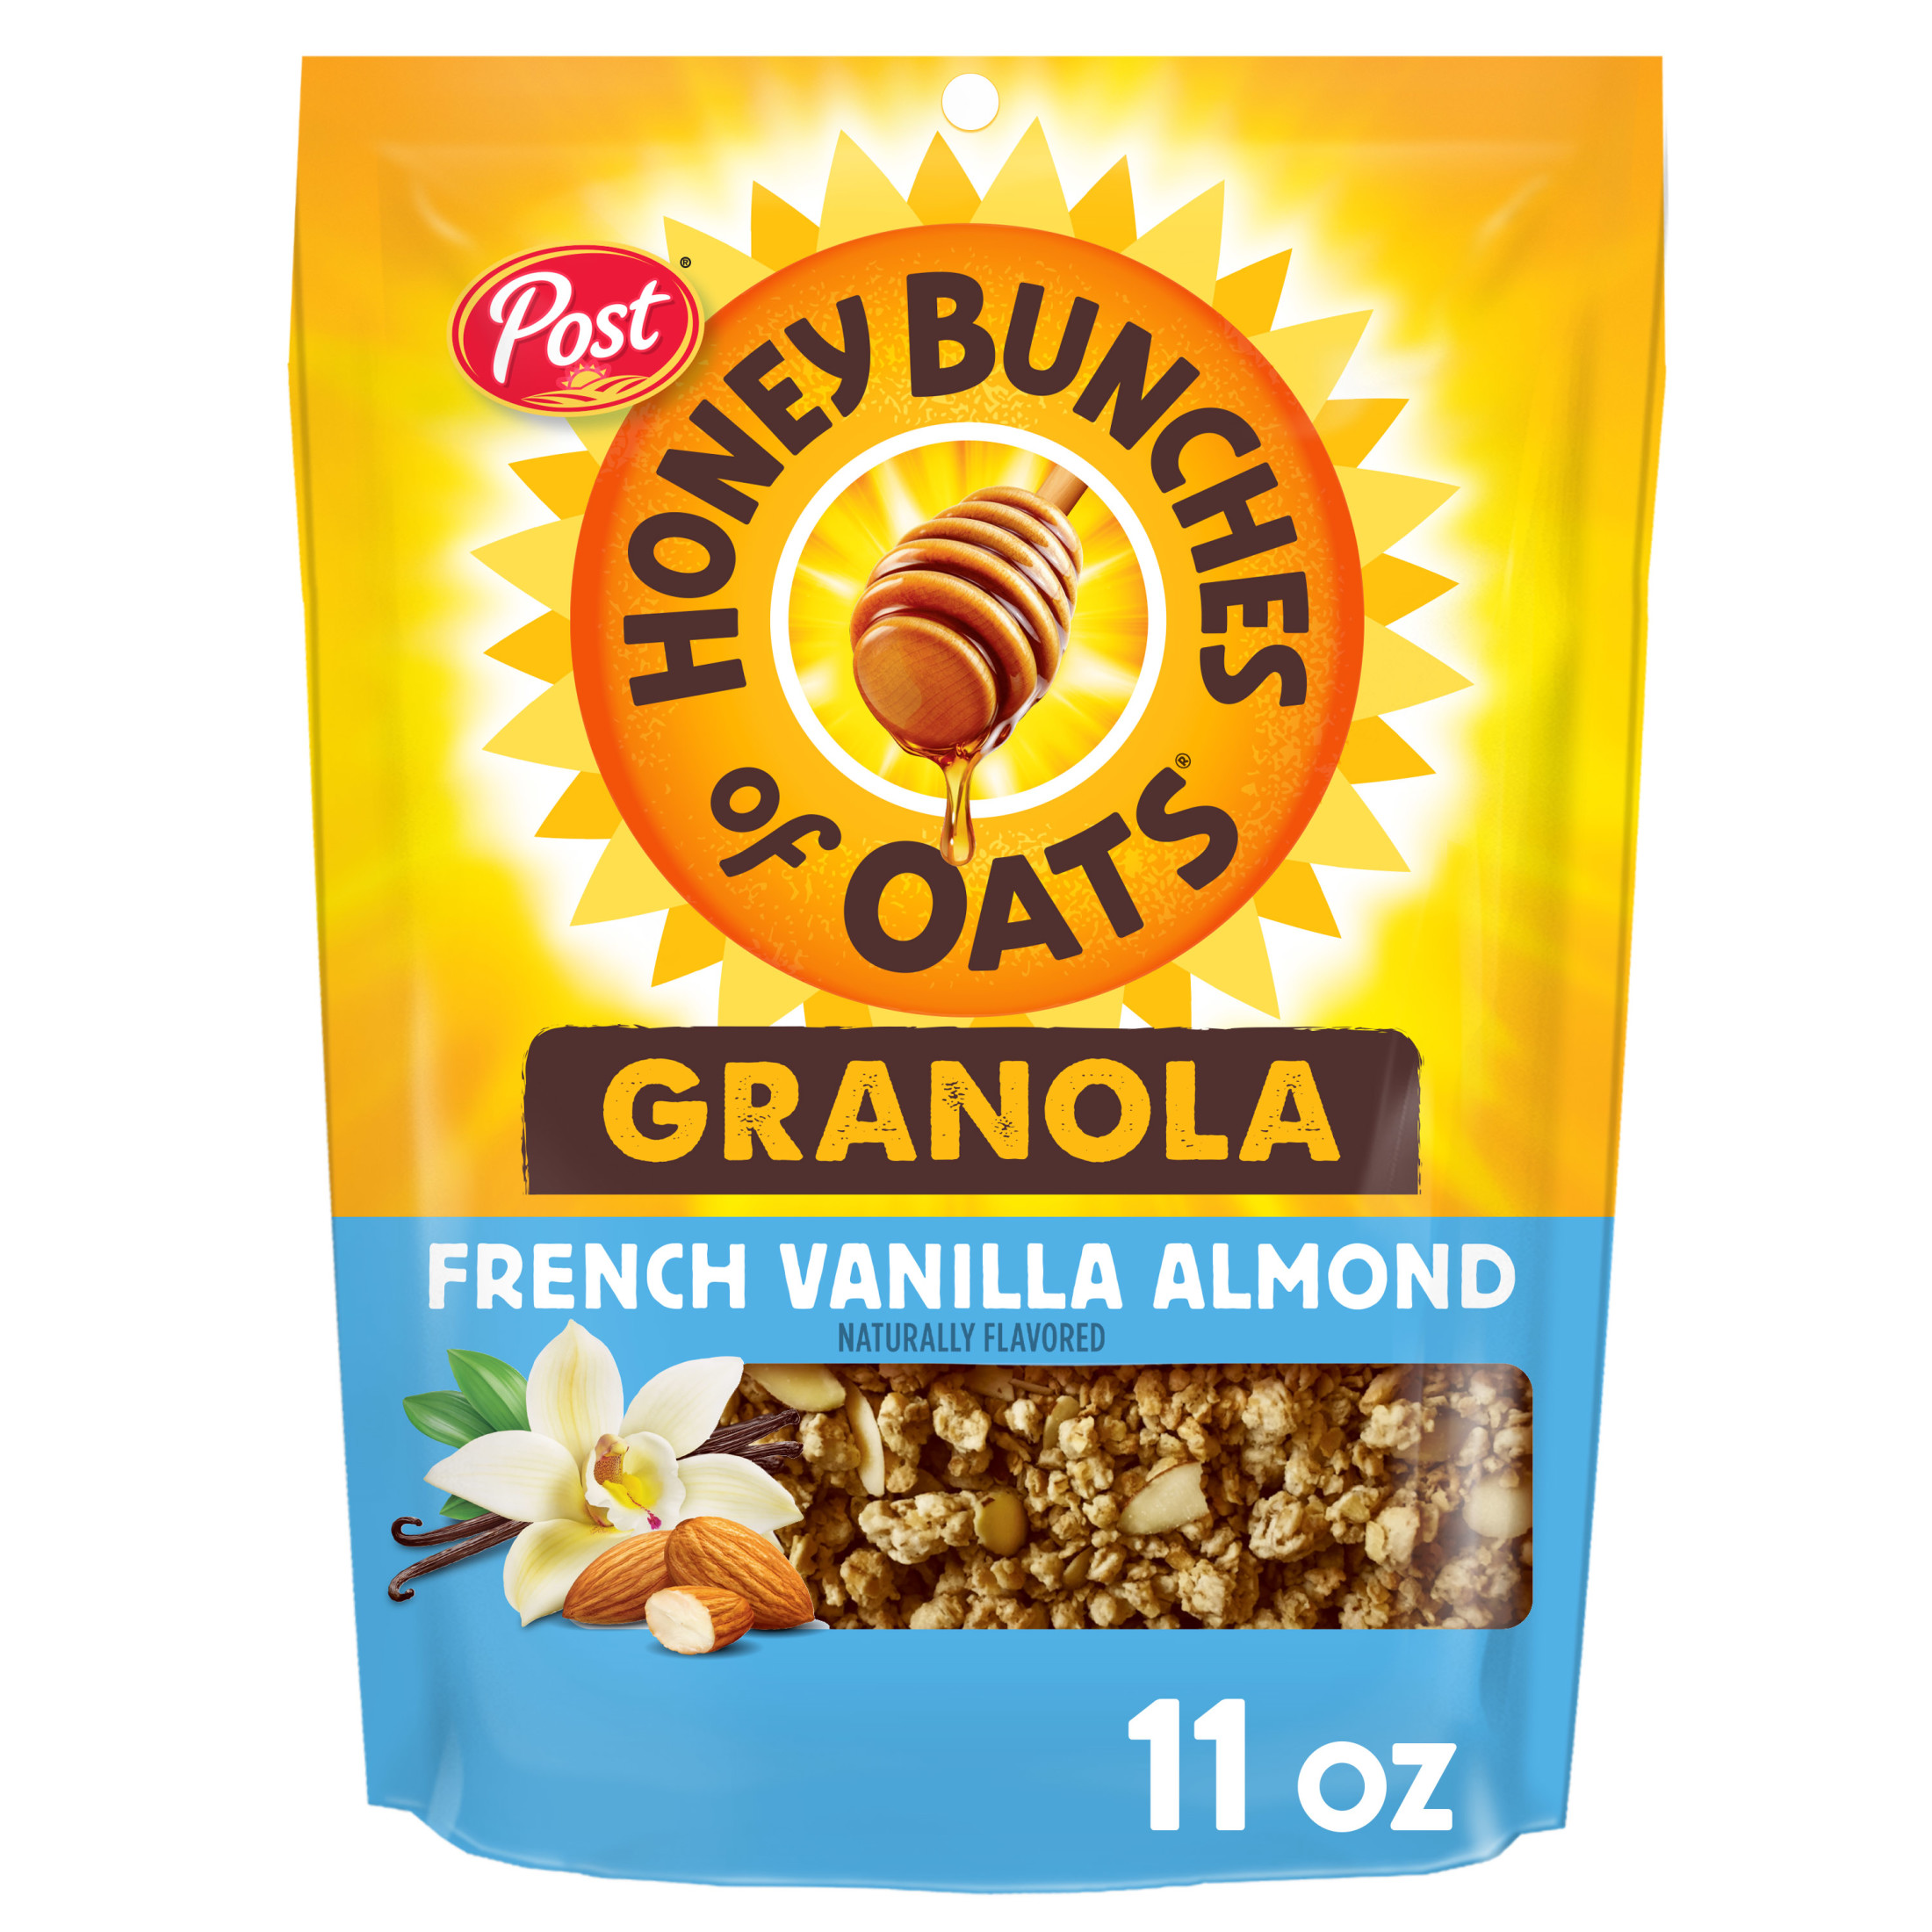 Post Honey Bunches of Oats French Vanilla Almond Granola Cereal, Vanilla Granola with Crushed Almonds, 11 oz Granola Bag - image 1 of 5